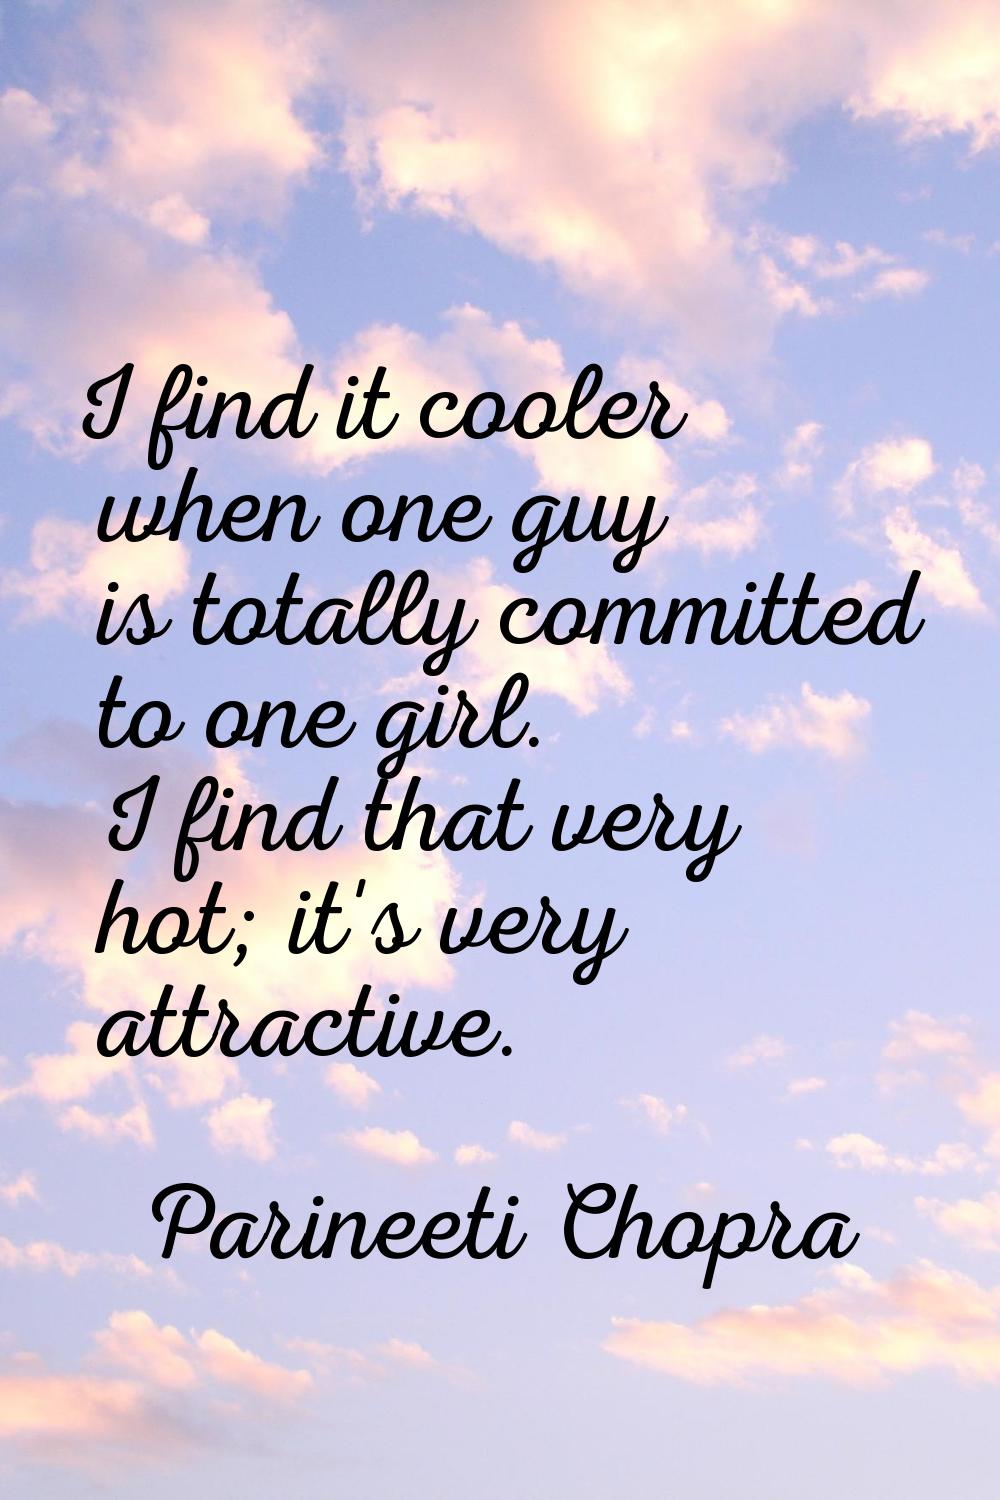 I find it cooler when one guy is totally committed to one girl. I find that very hot; it's very att